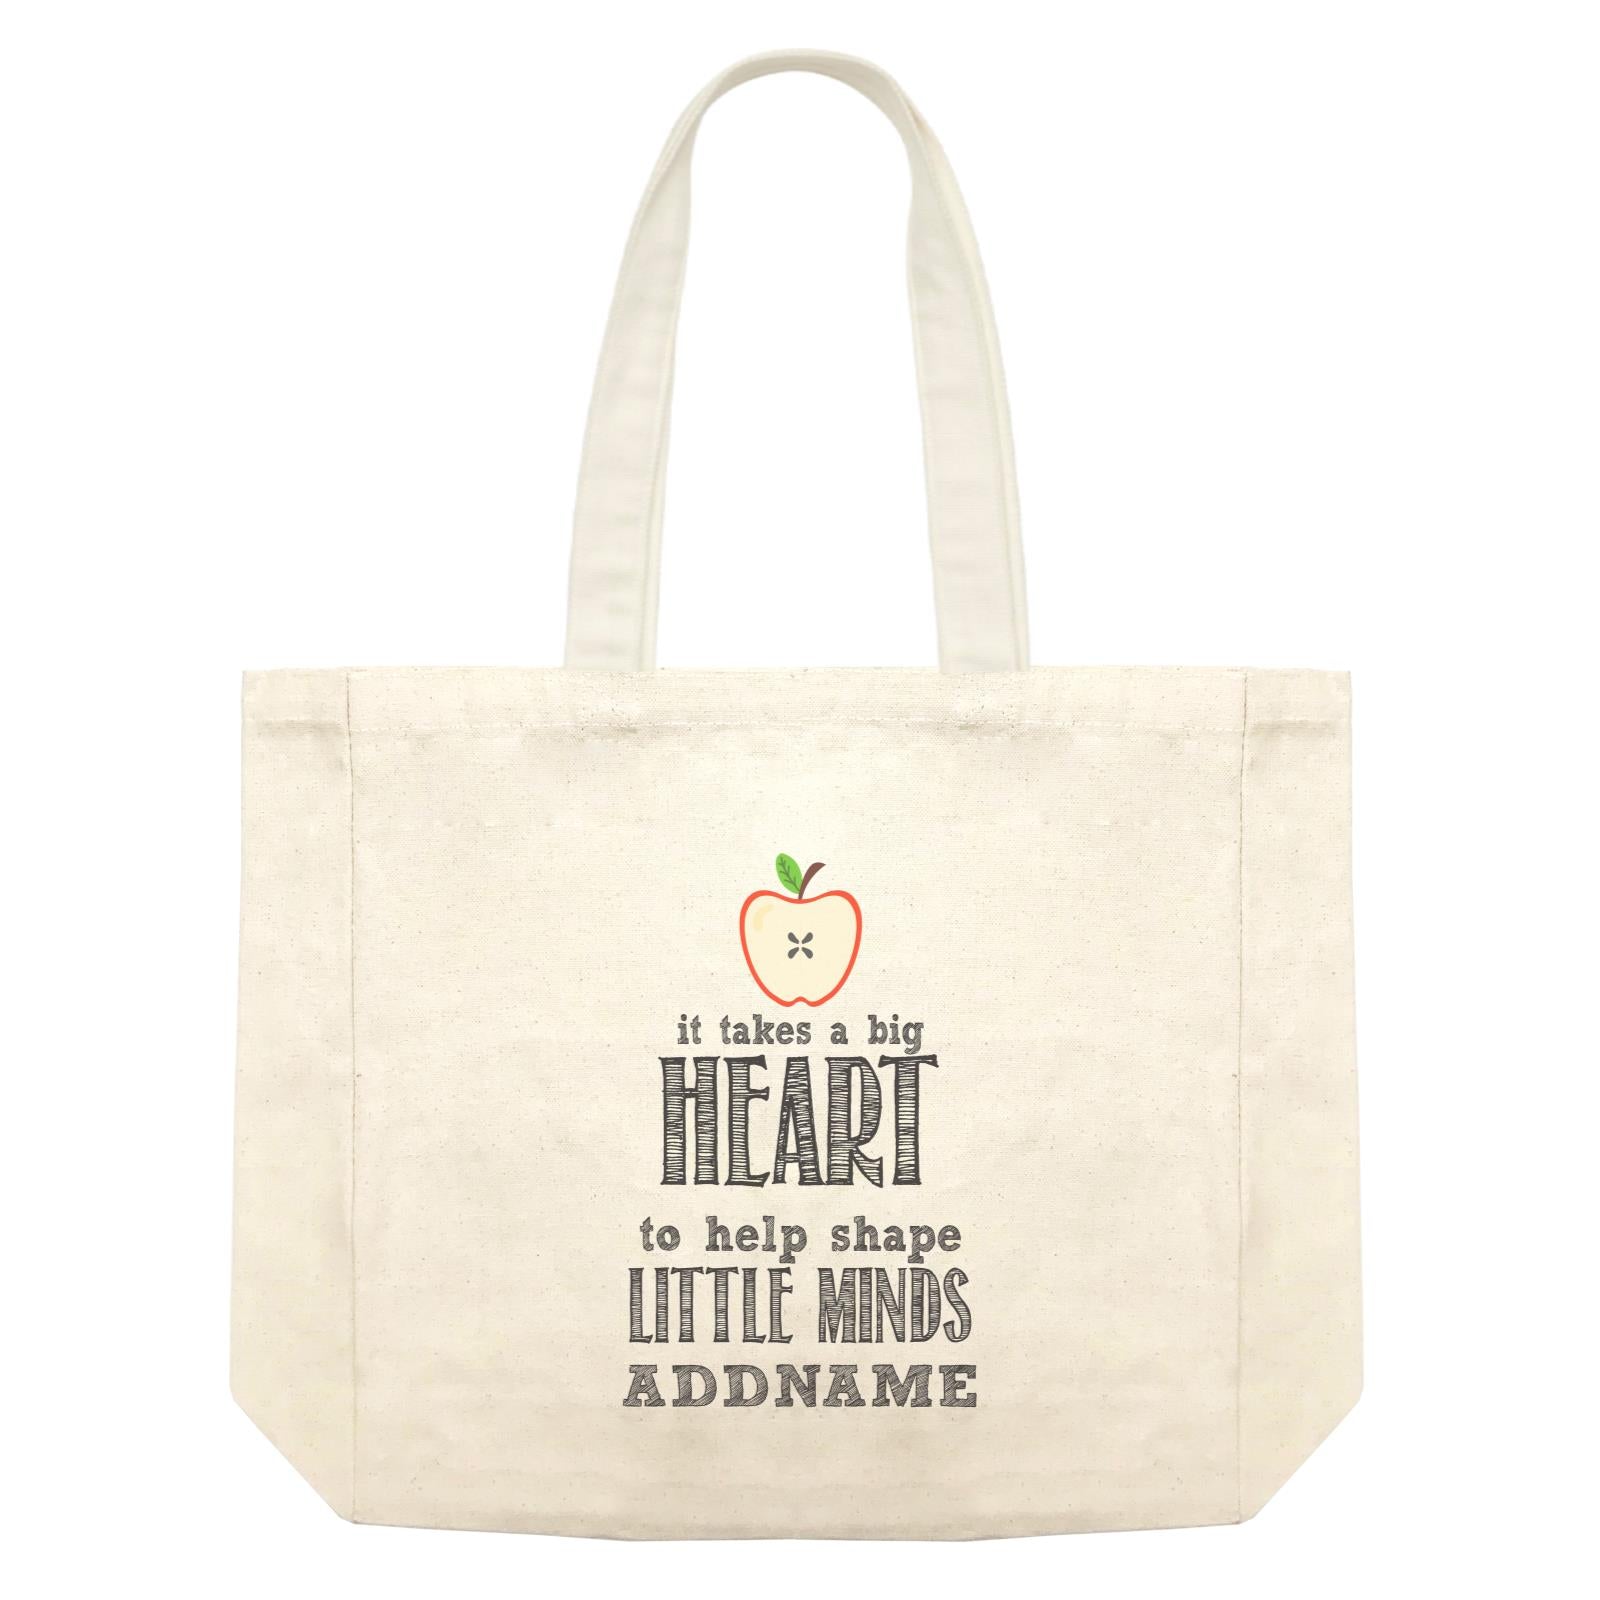 Inspiration Quotes Apple It Takes A Big Heart To Help Shape Little Minds Addname Shopping Bag